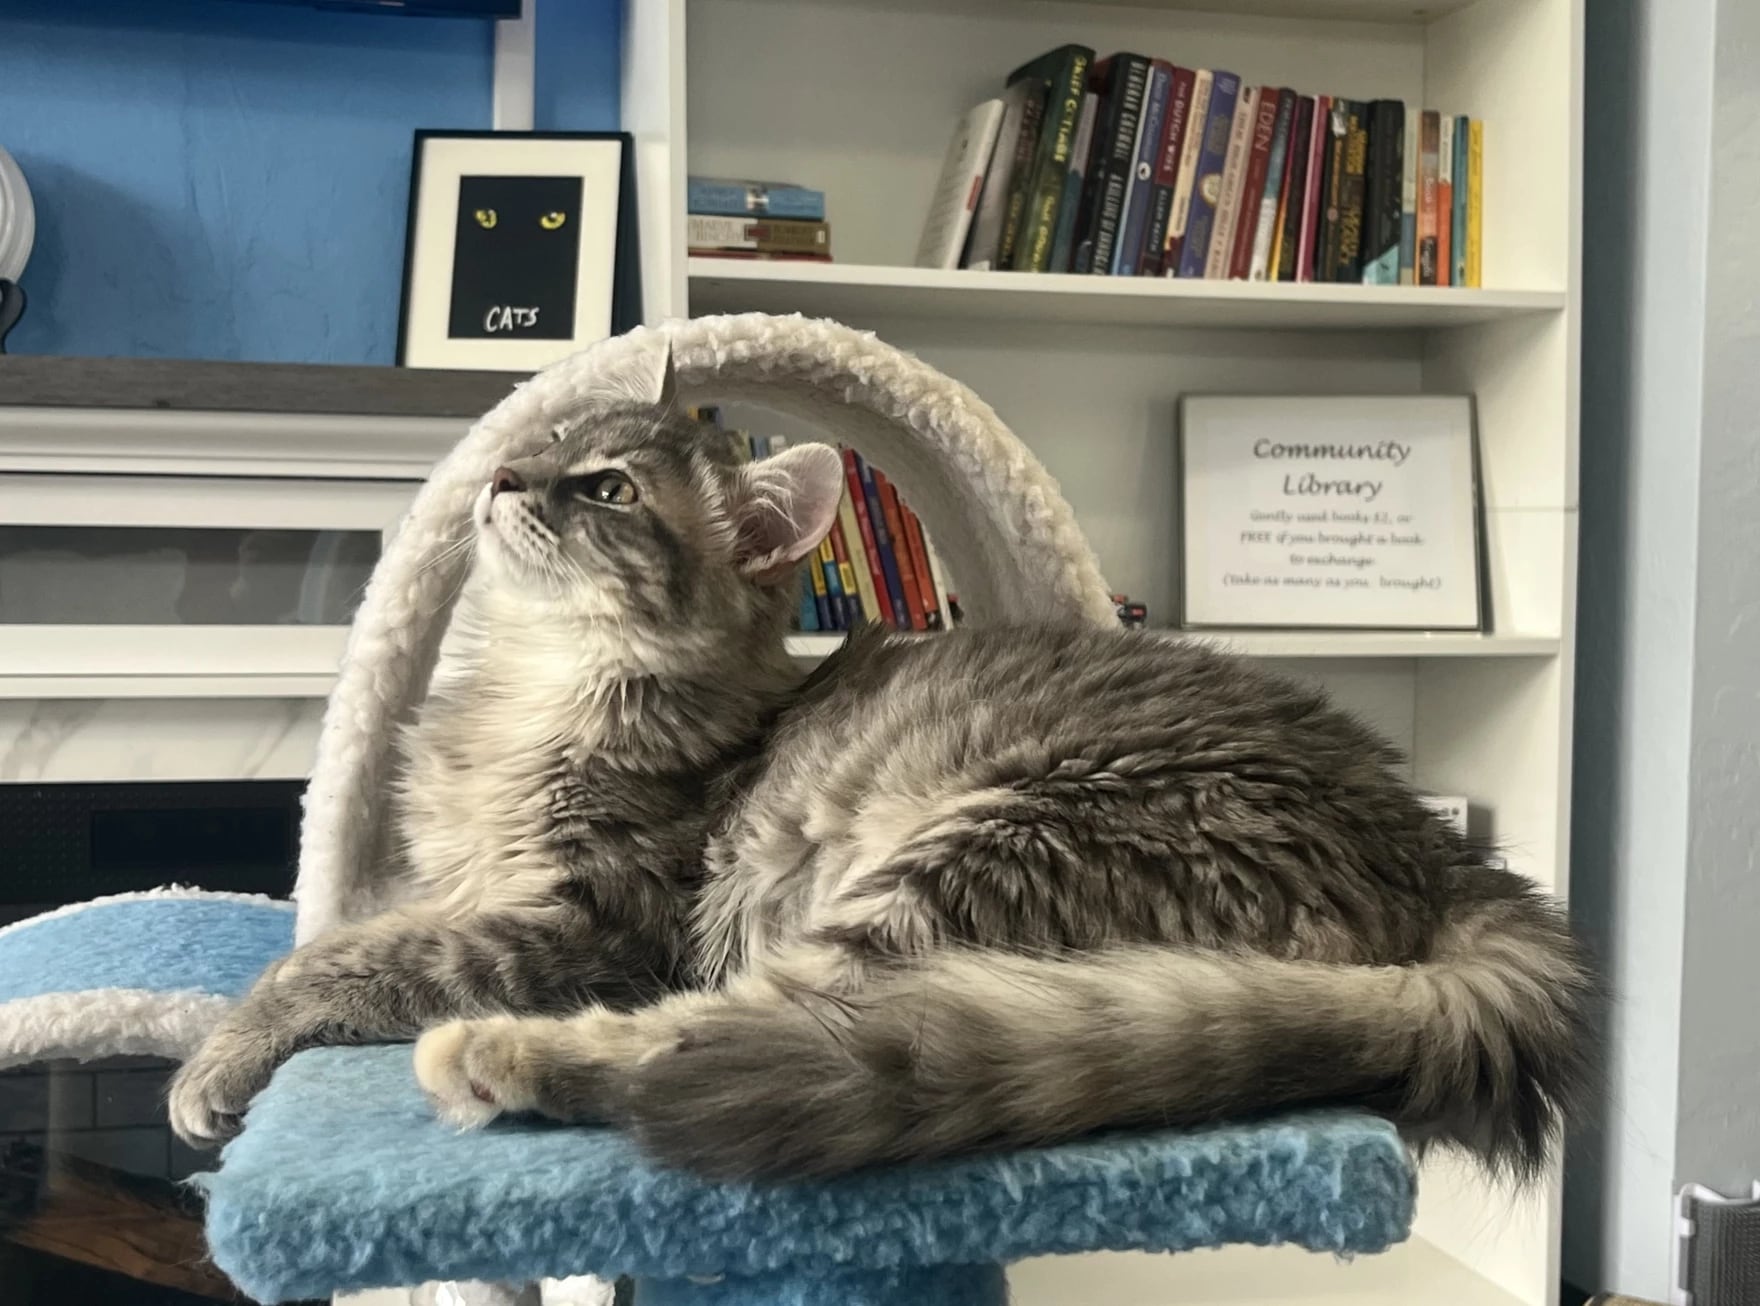 A cat café in Springfield seeks to find homes for foster kitties